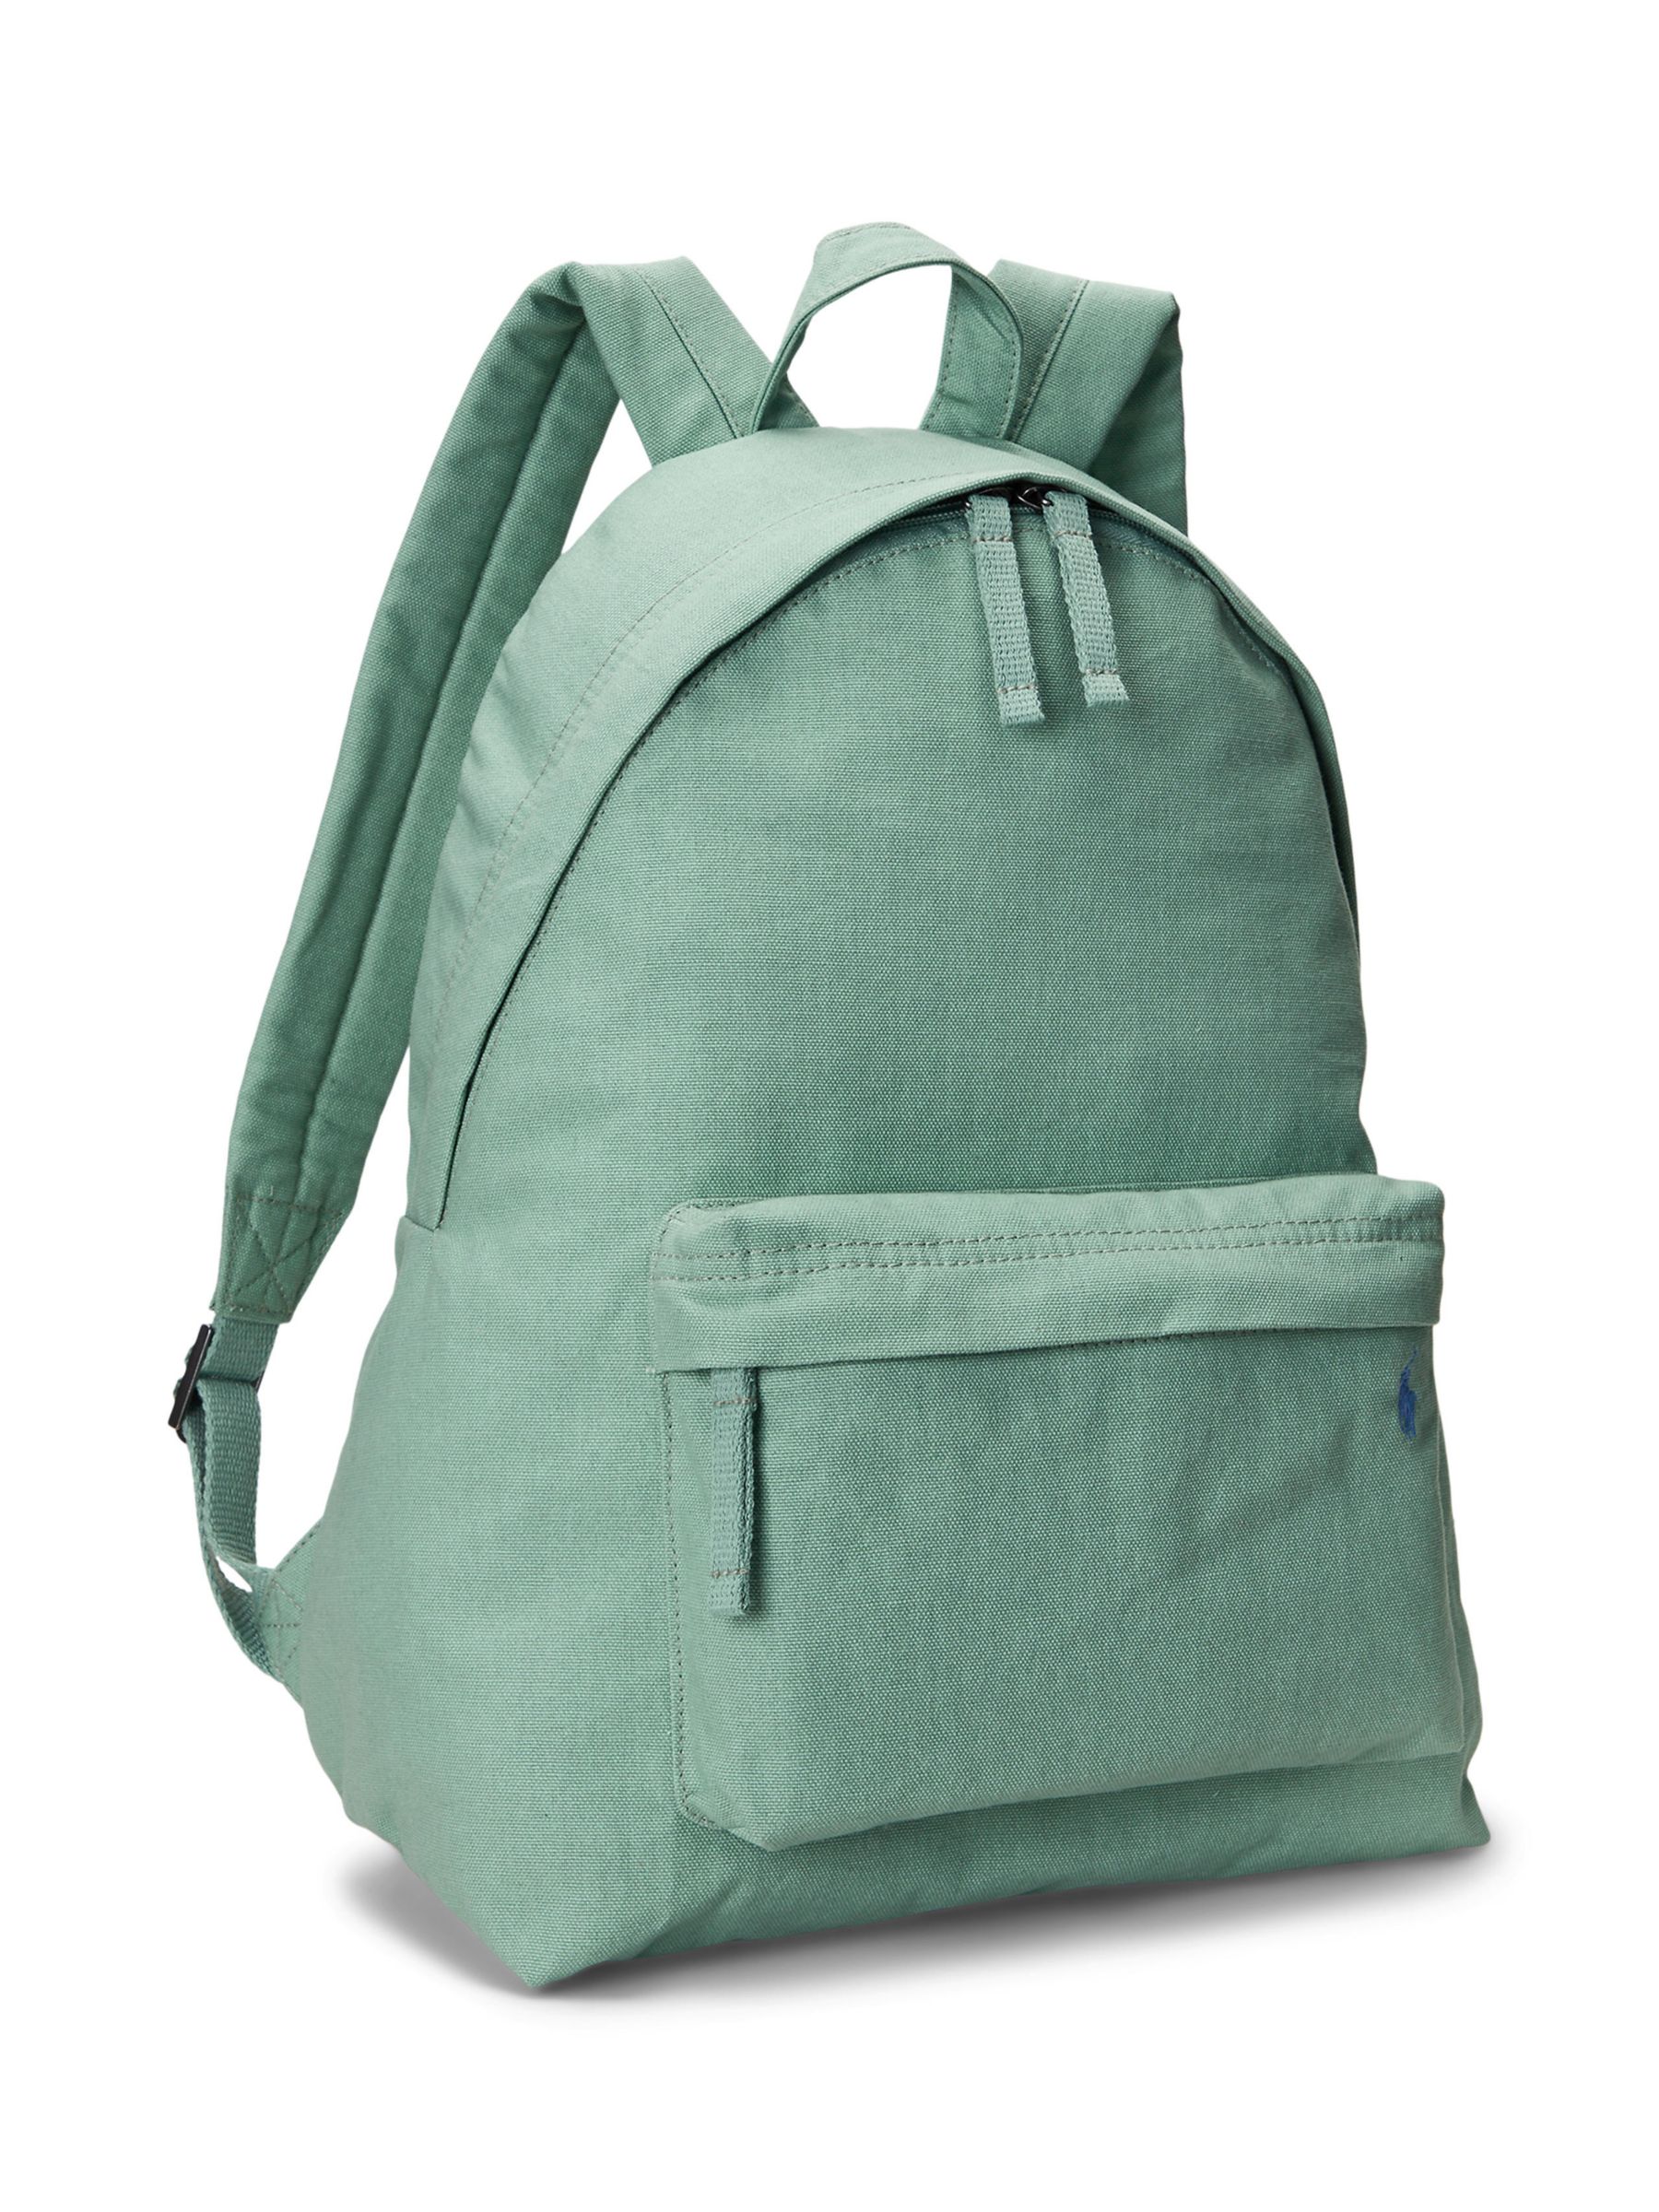 Buy Ralph Lauren Large Canvas Backpack, Faded Mint Online at johnlewis.com